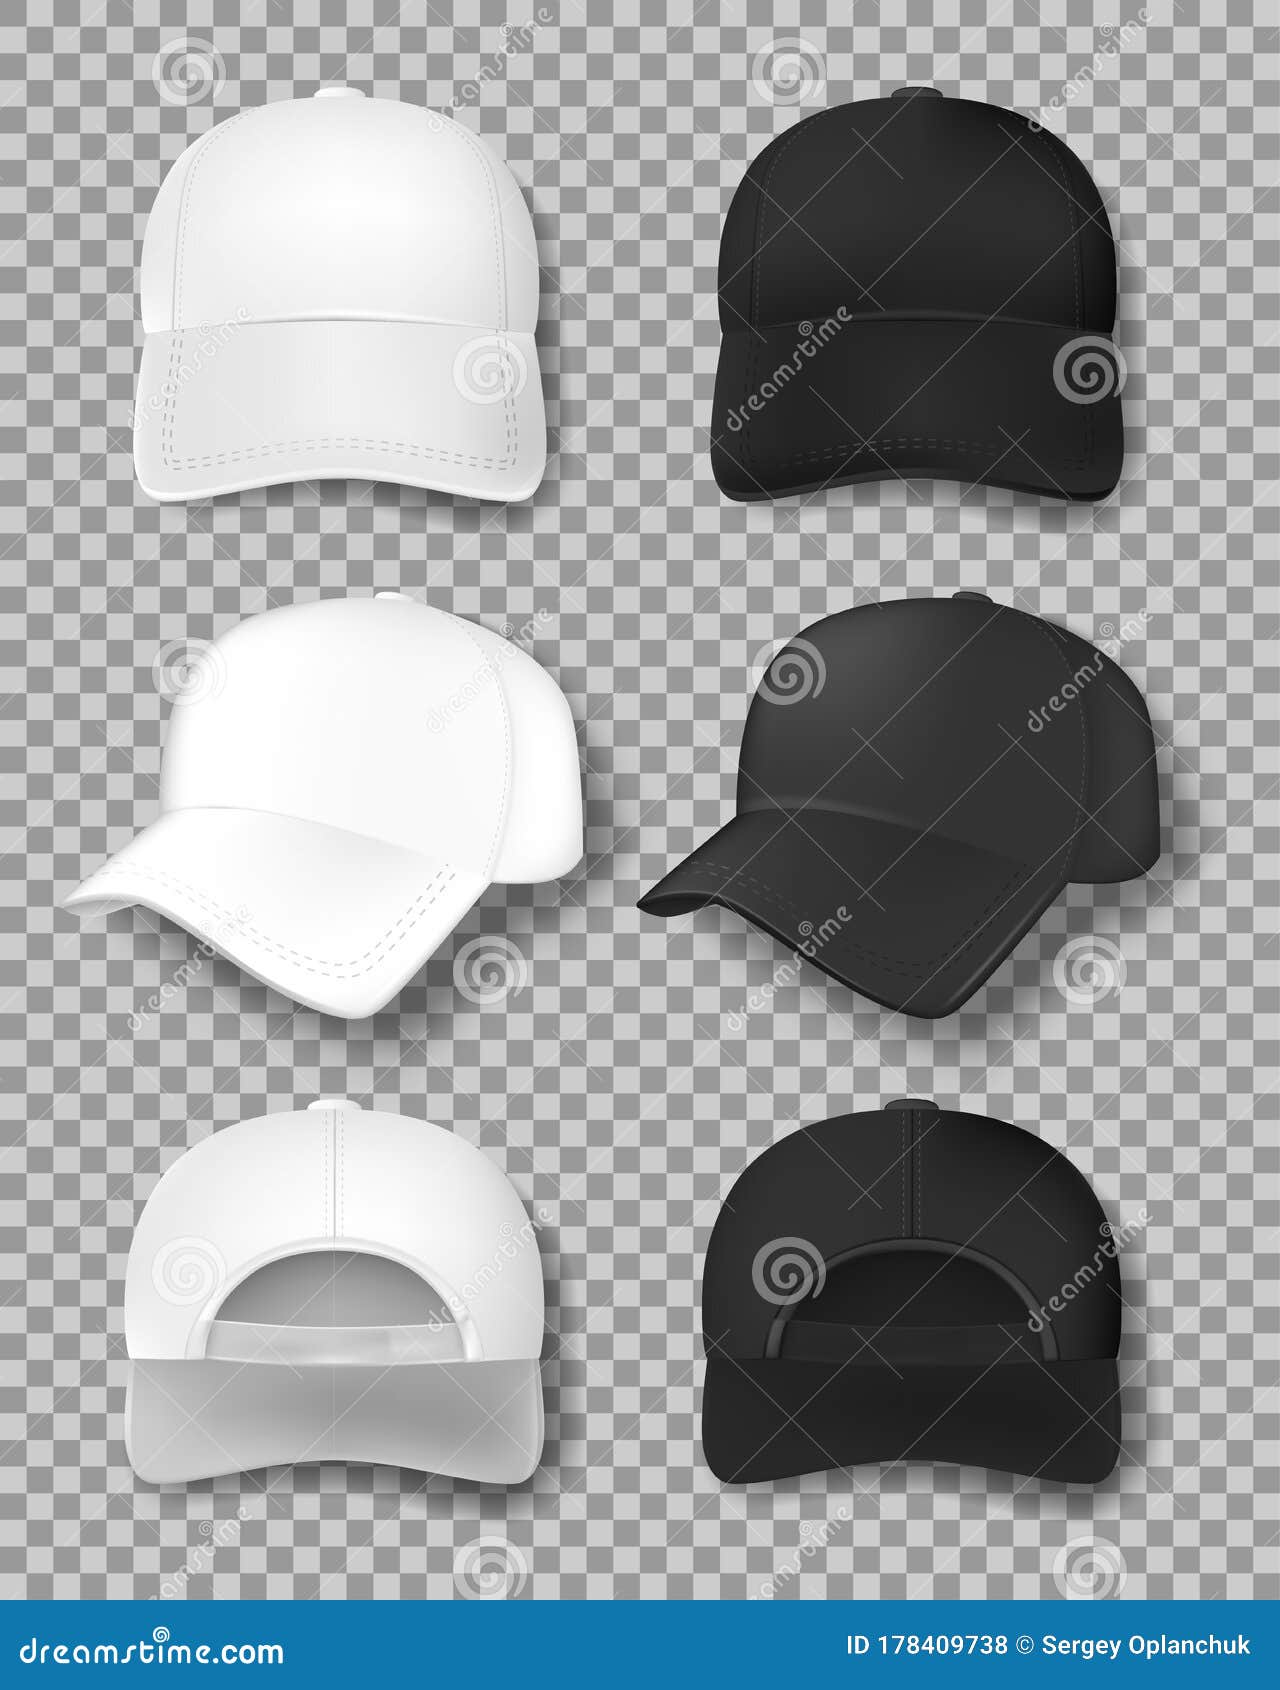 Download Realistic Baseball Cap Mockup Isolated On Transparent ...